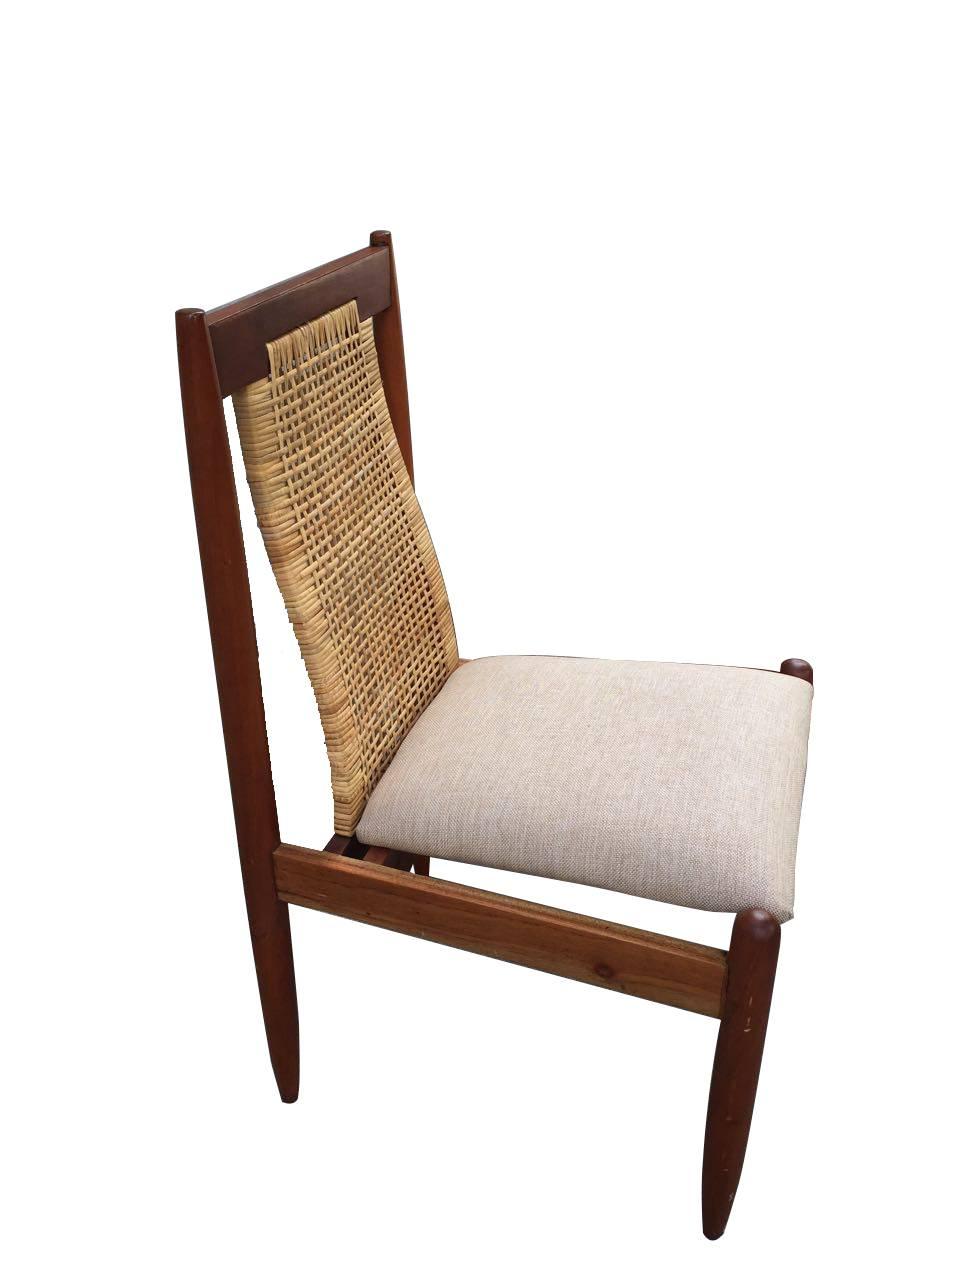 60s. Pair of chairs. Made in wood. With woven palm backrests, beige upholstery seats and conical supports.

Frank Kyle was born in Minneapolis, Minnesota in 1914, of Irish descent. Since he was a child he practiced blacksmithing, carpentry and